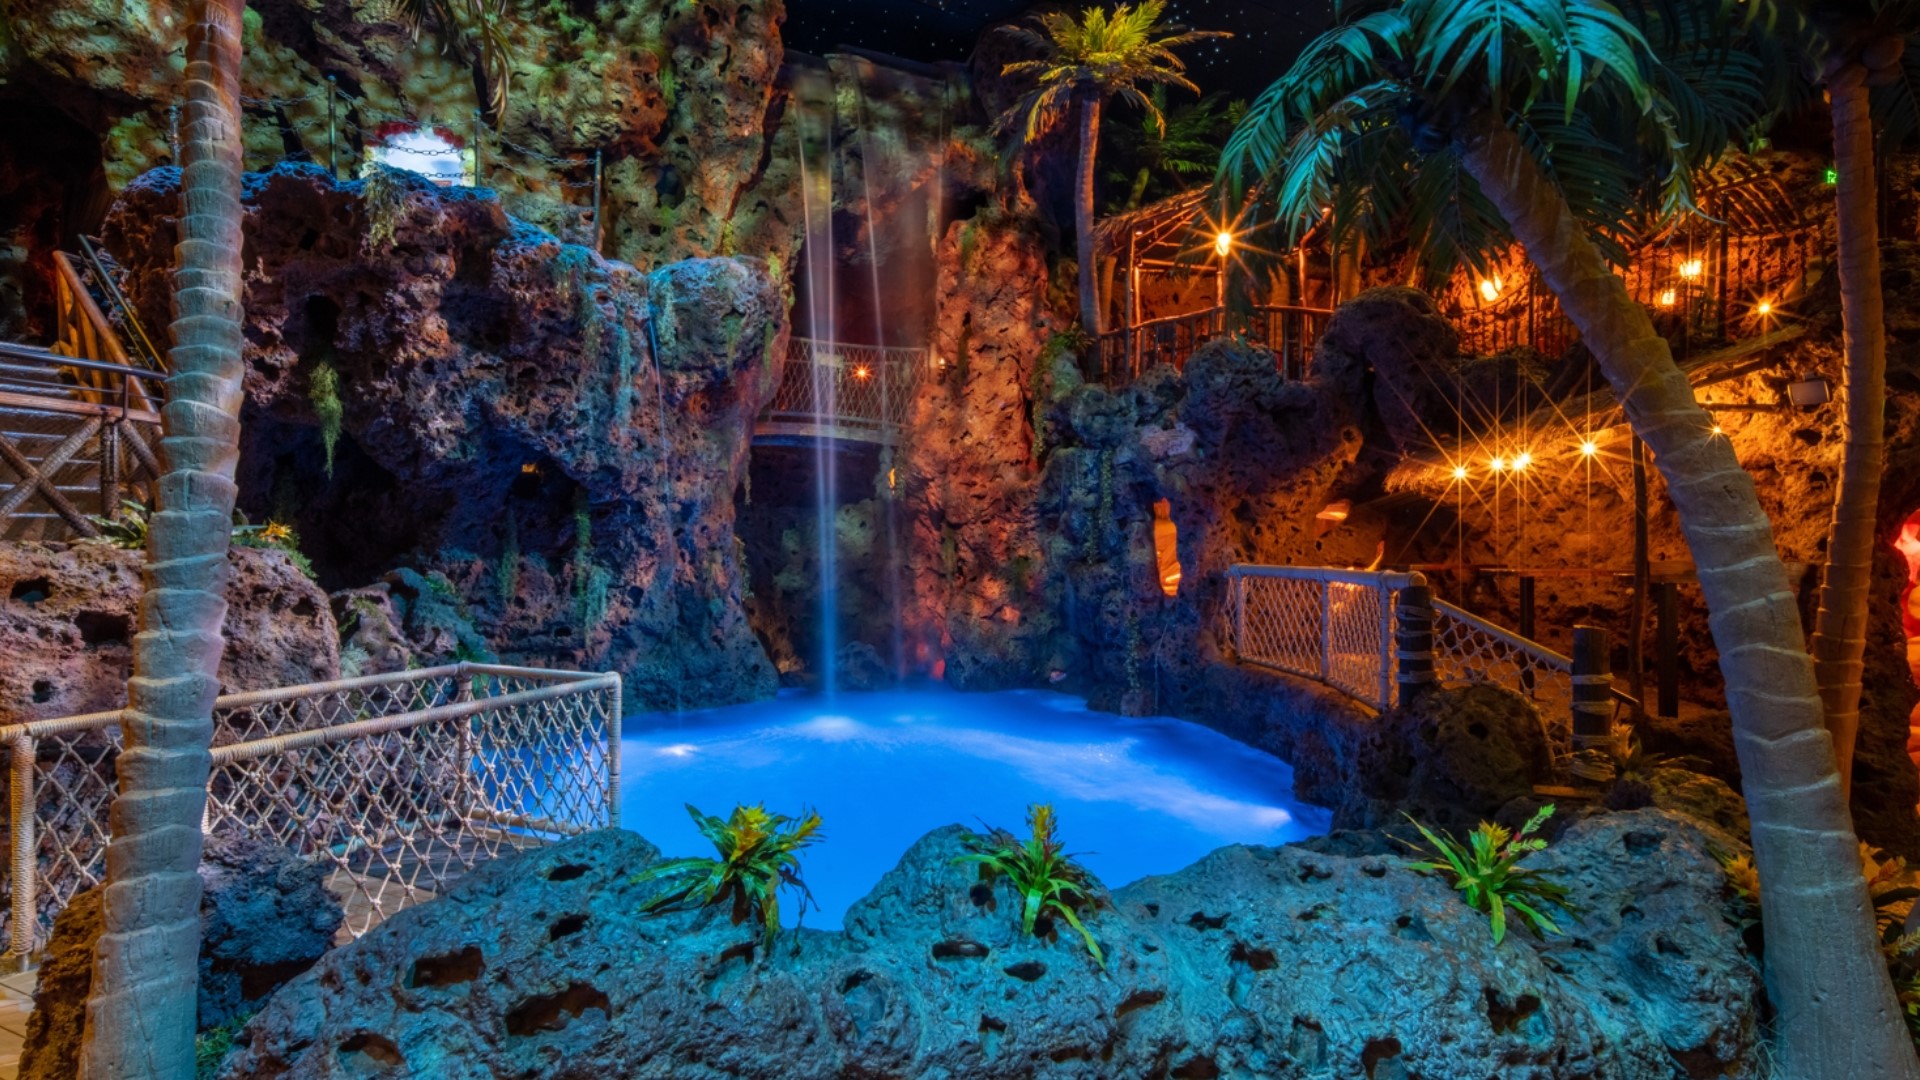 Casa Bonita is on the verge of reopening for the first time in more than three years, and local media got a peek Friday inside the iconic Mexican restaurant.